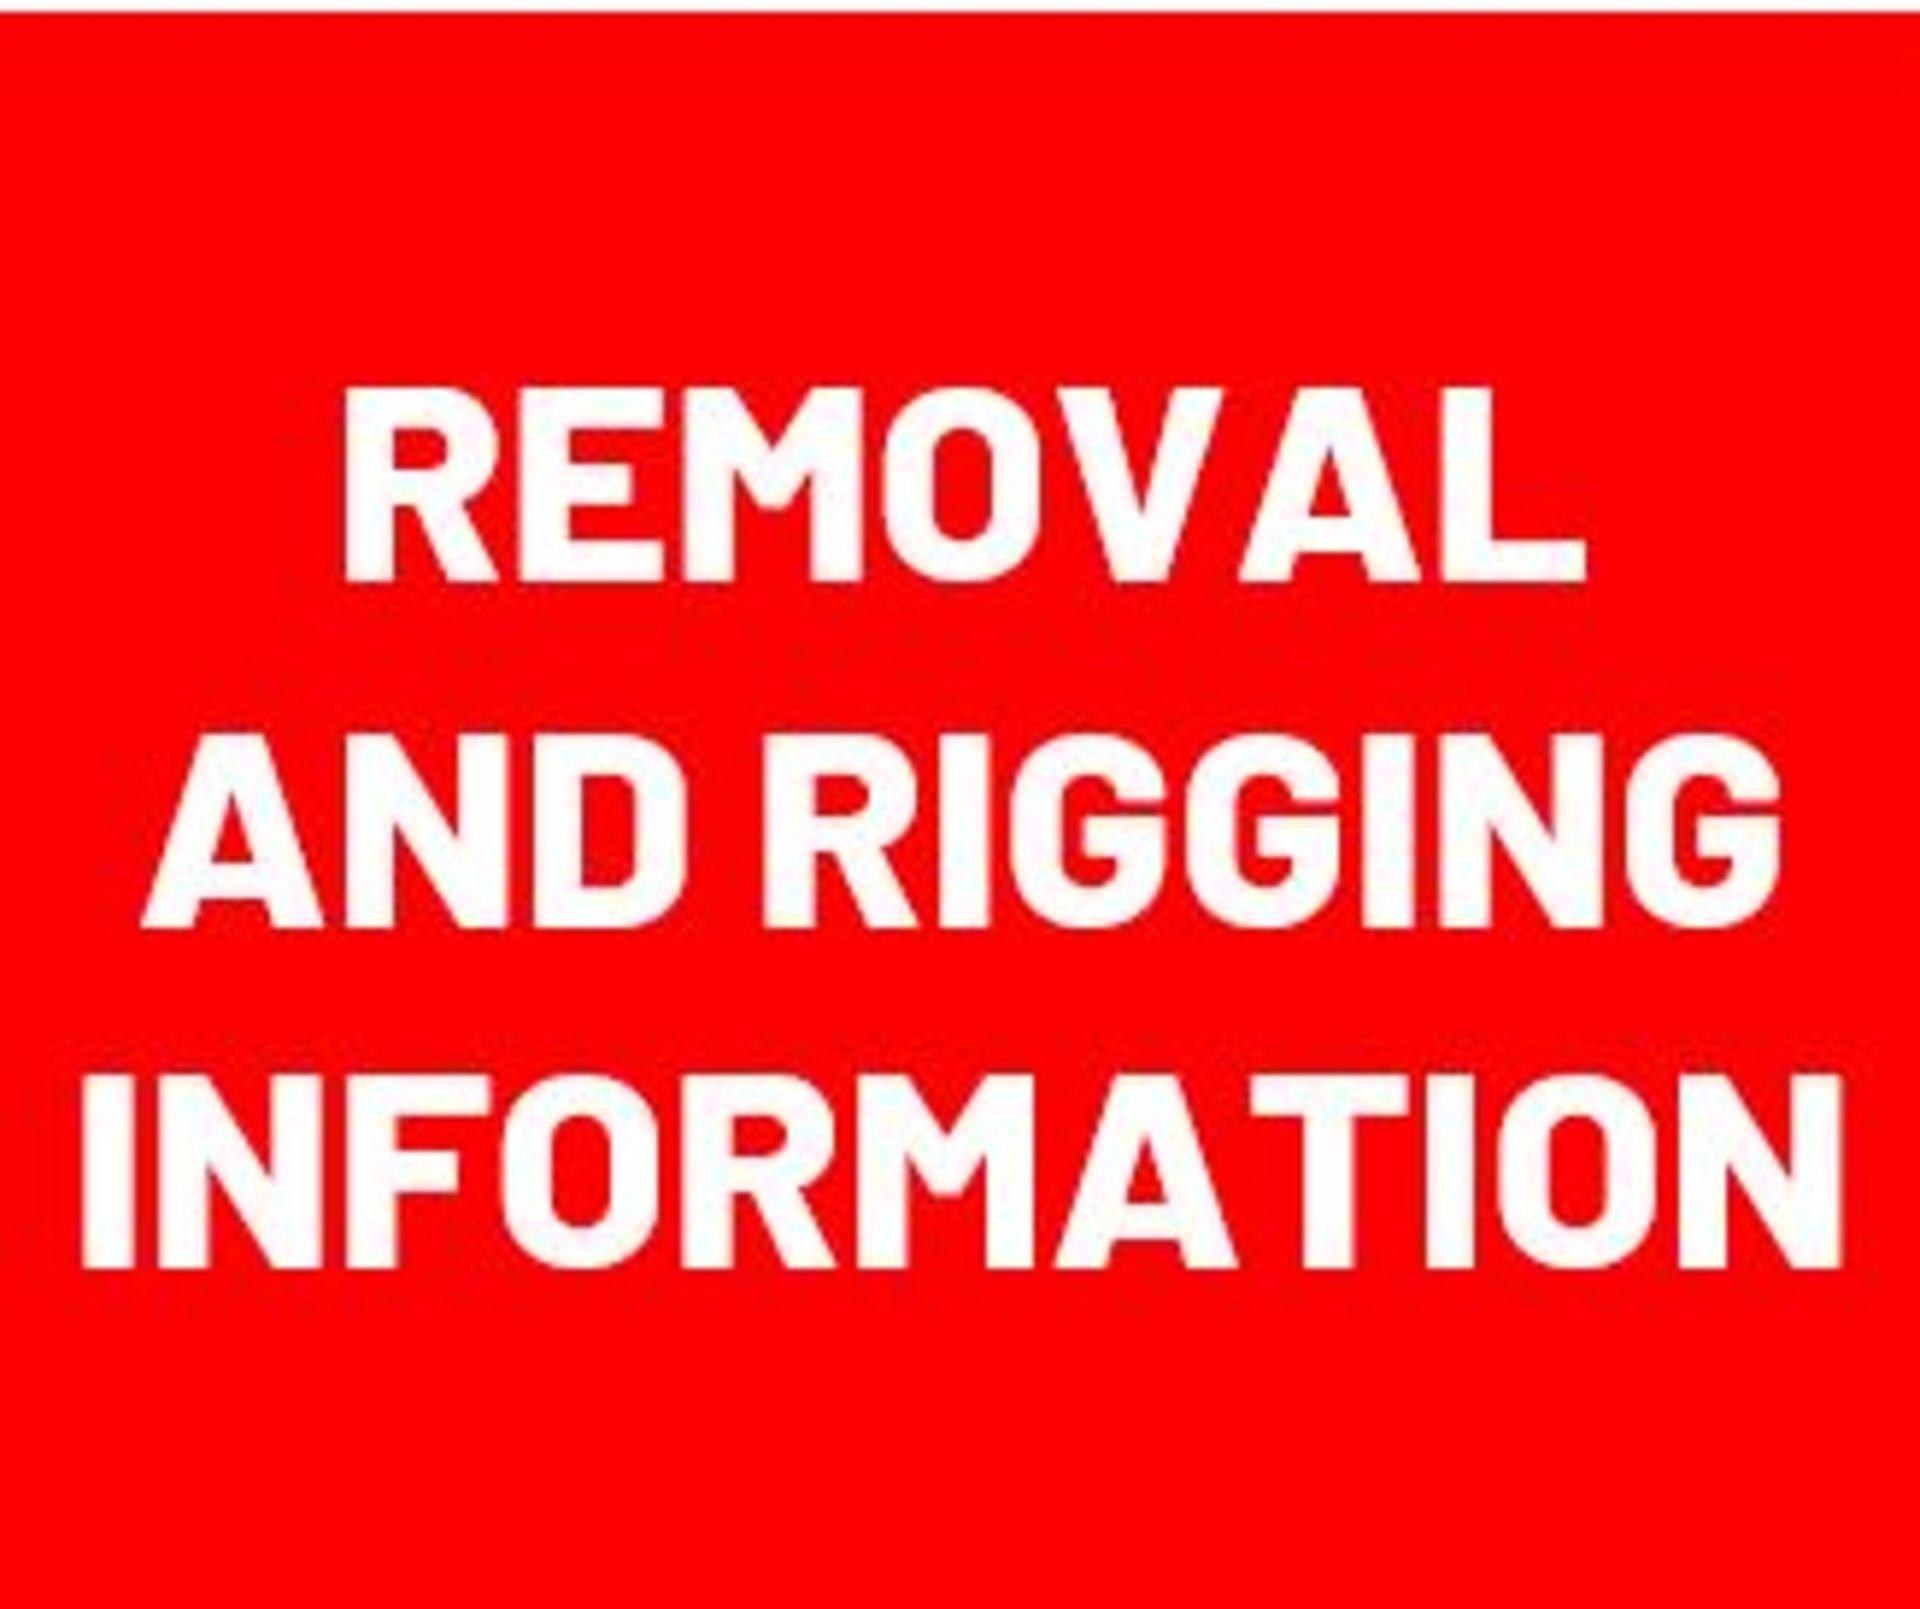 Removal and Rigging Information